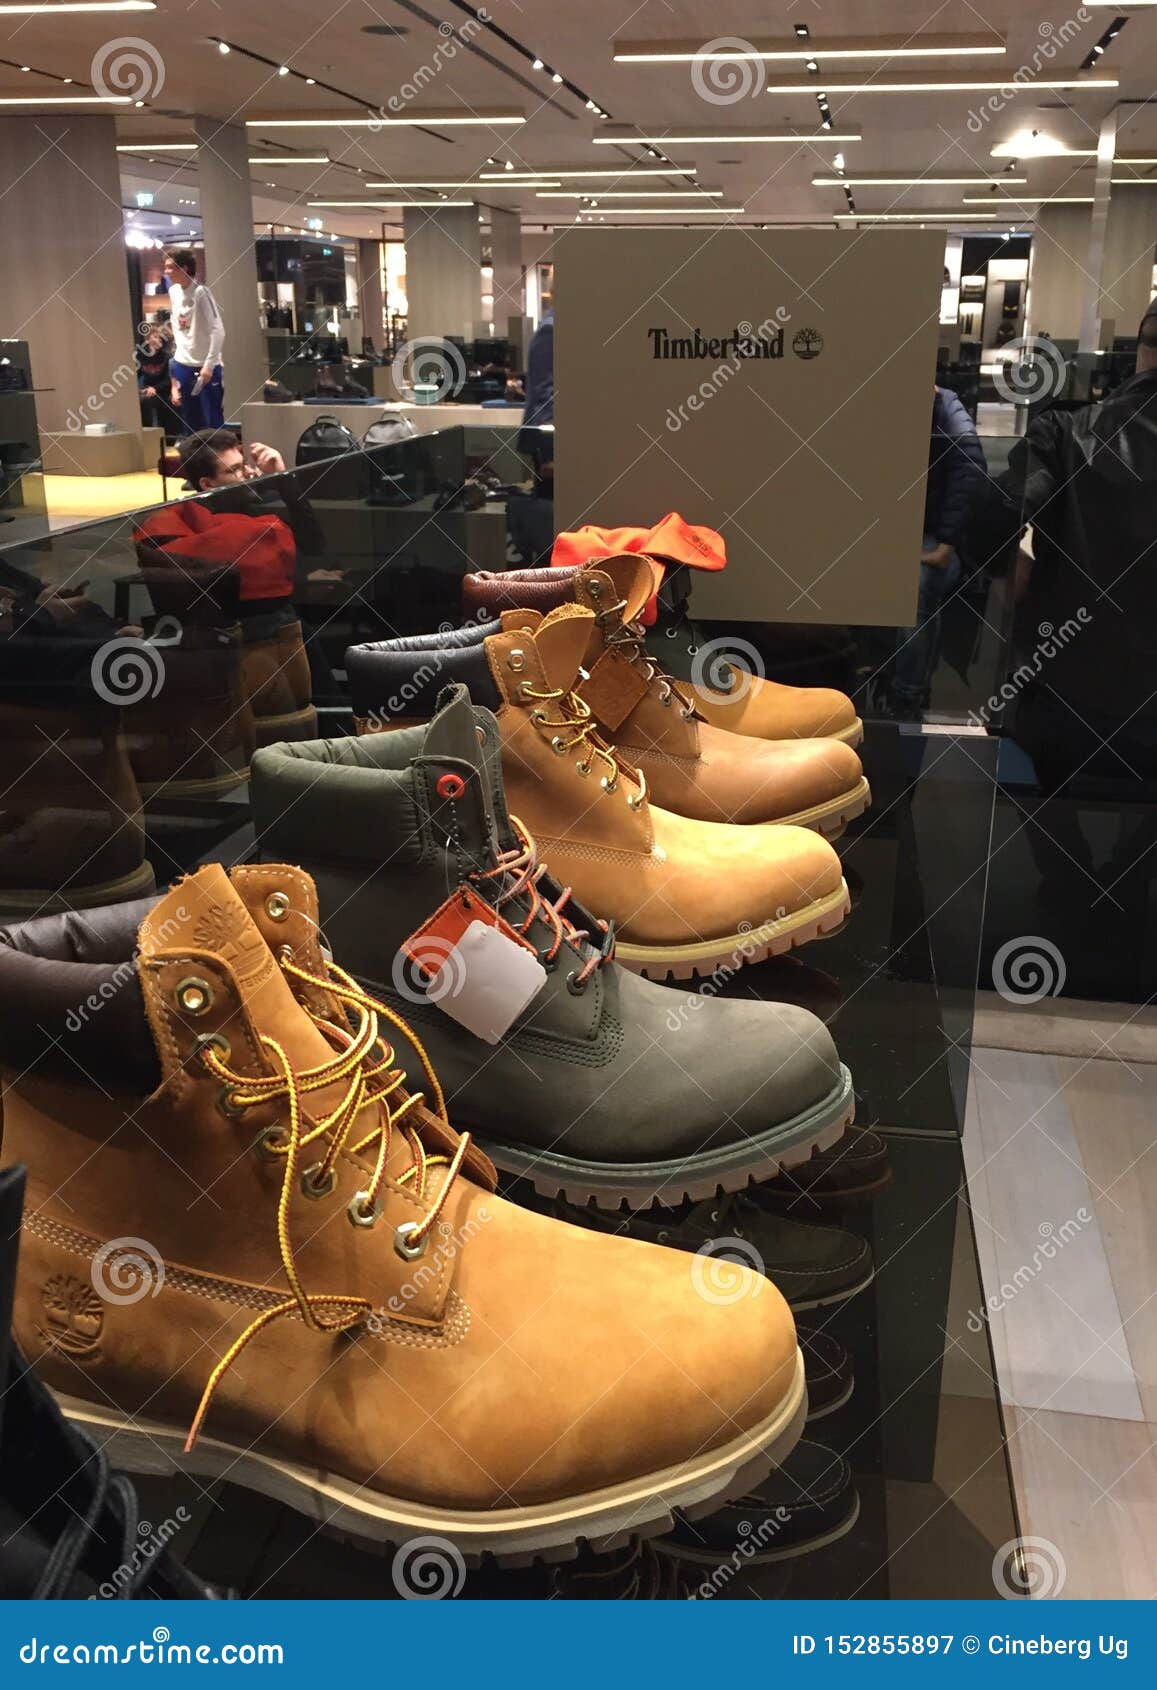 425 Timberland Shoes Photos - & Photos from Dreamstime